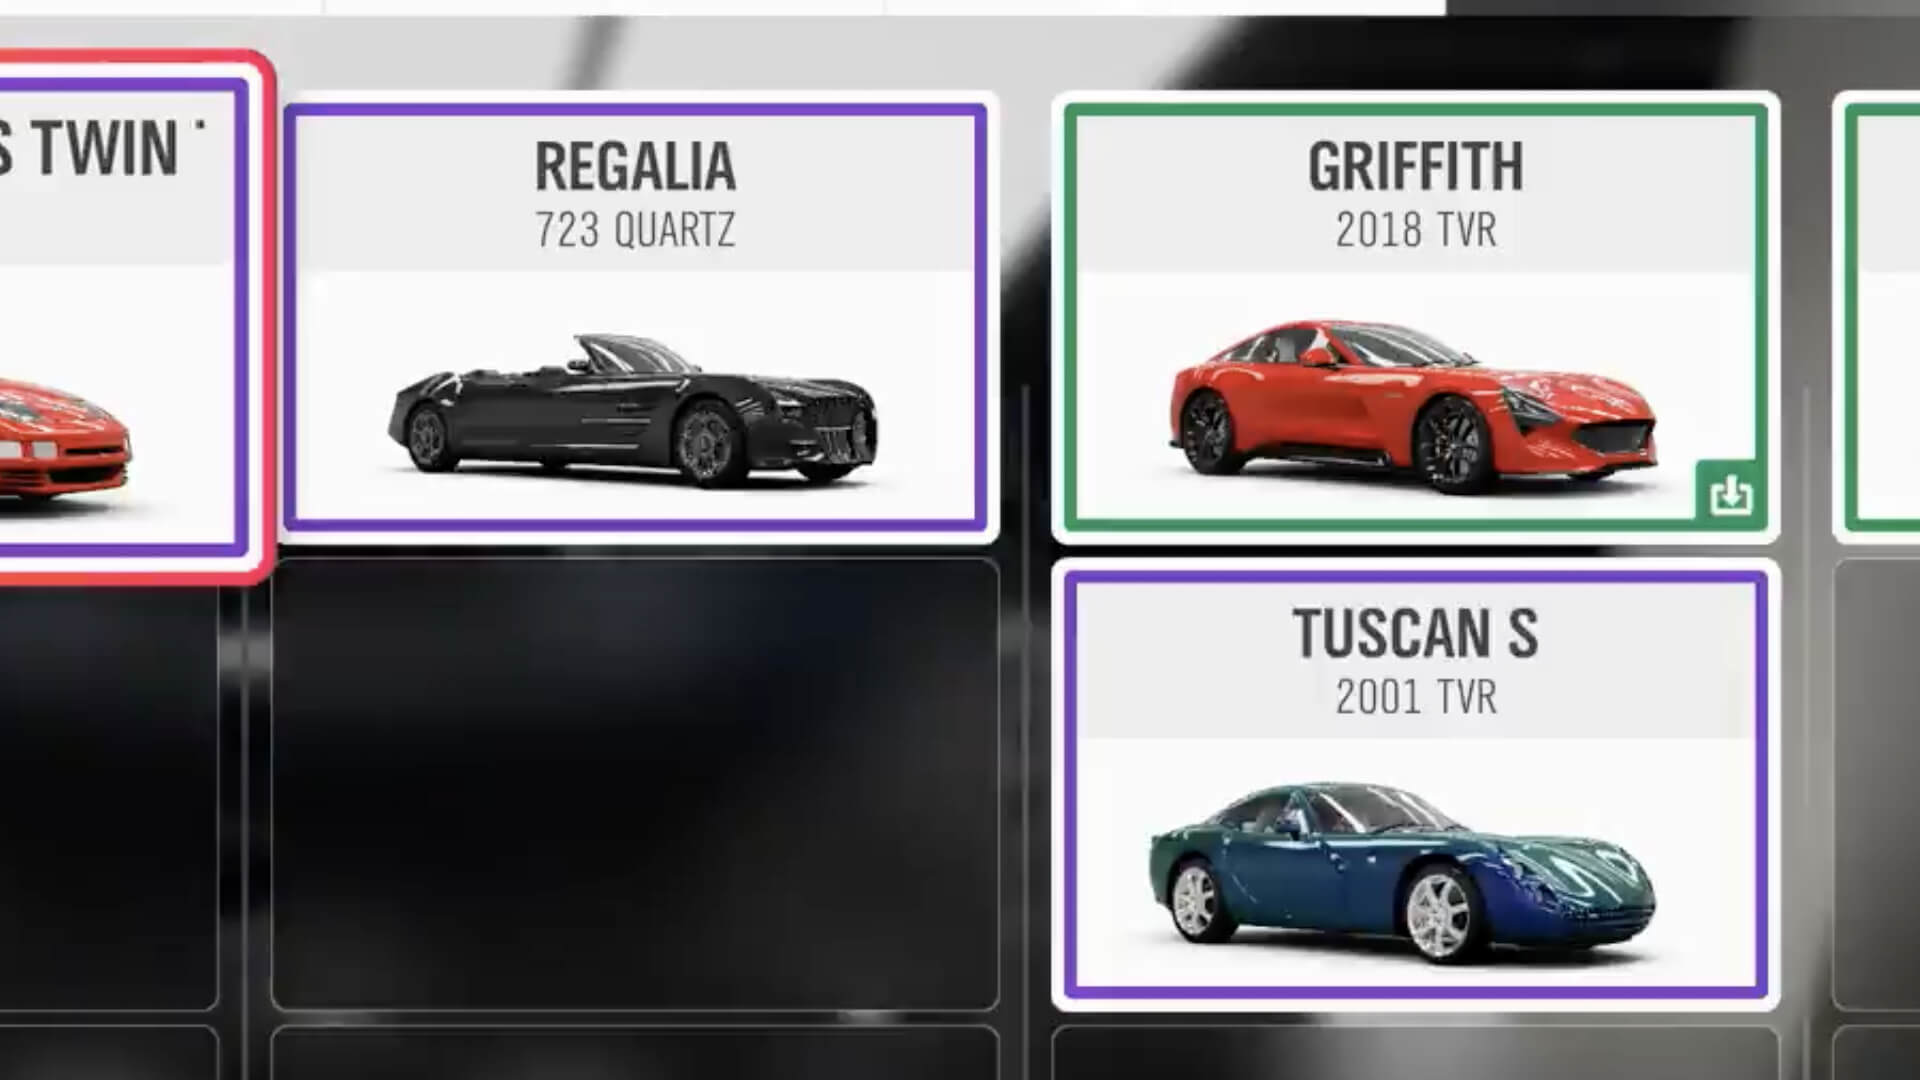 Forza Horizon 4 Series 6 Car Pass Revealed Tvr Griffith And A Big Pink Caddy